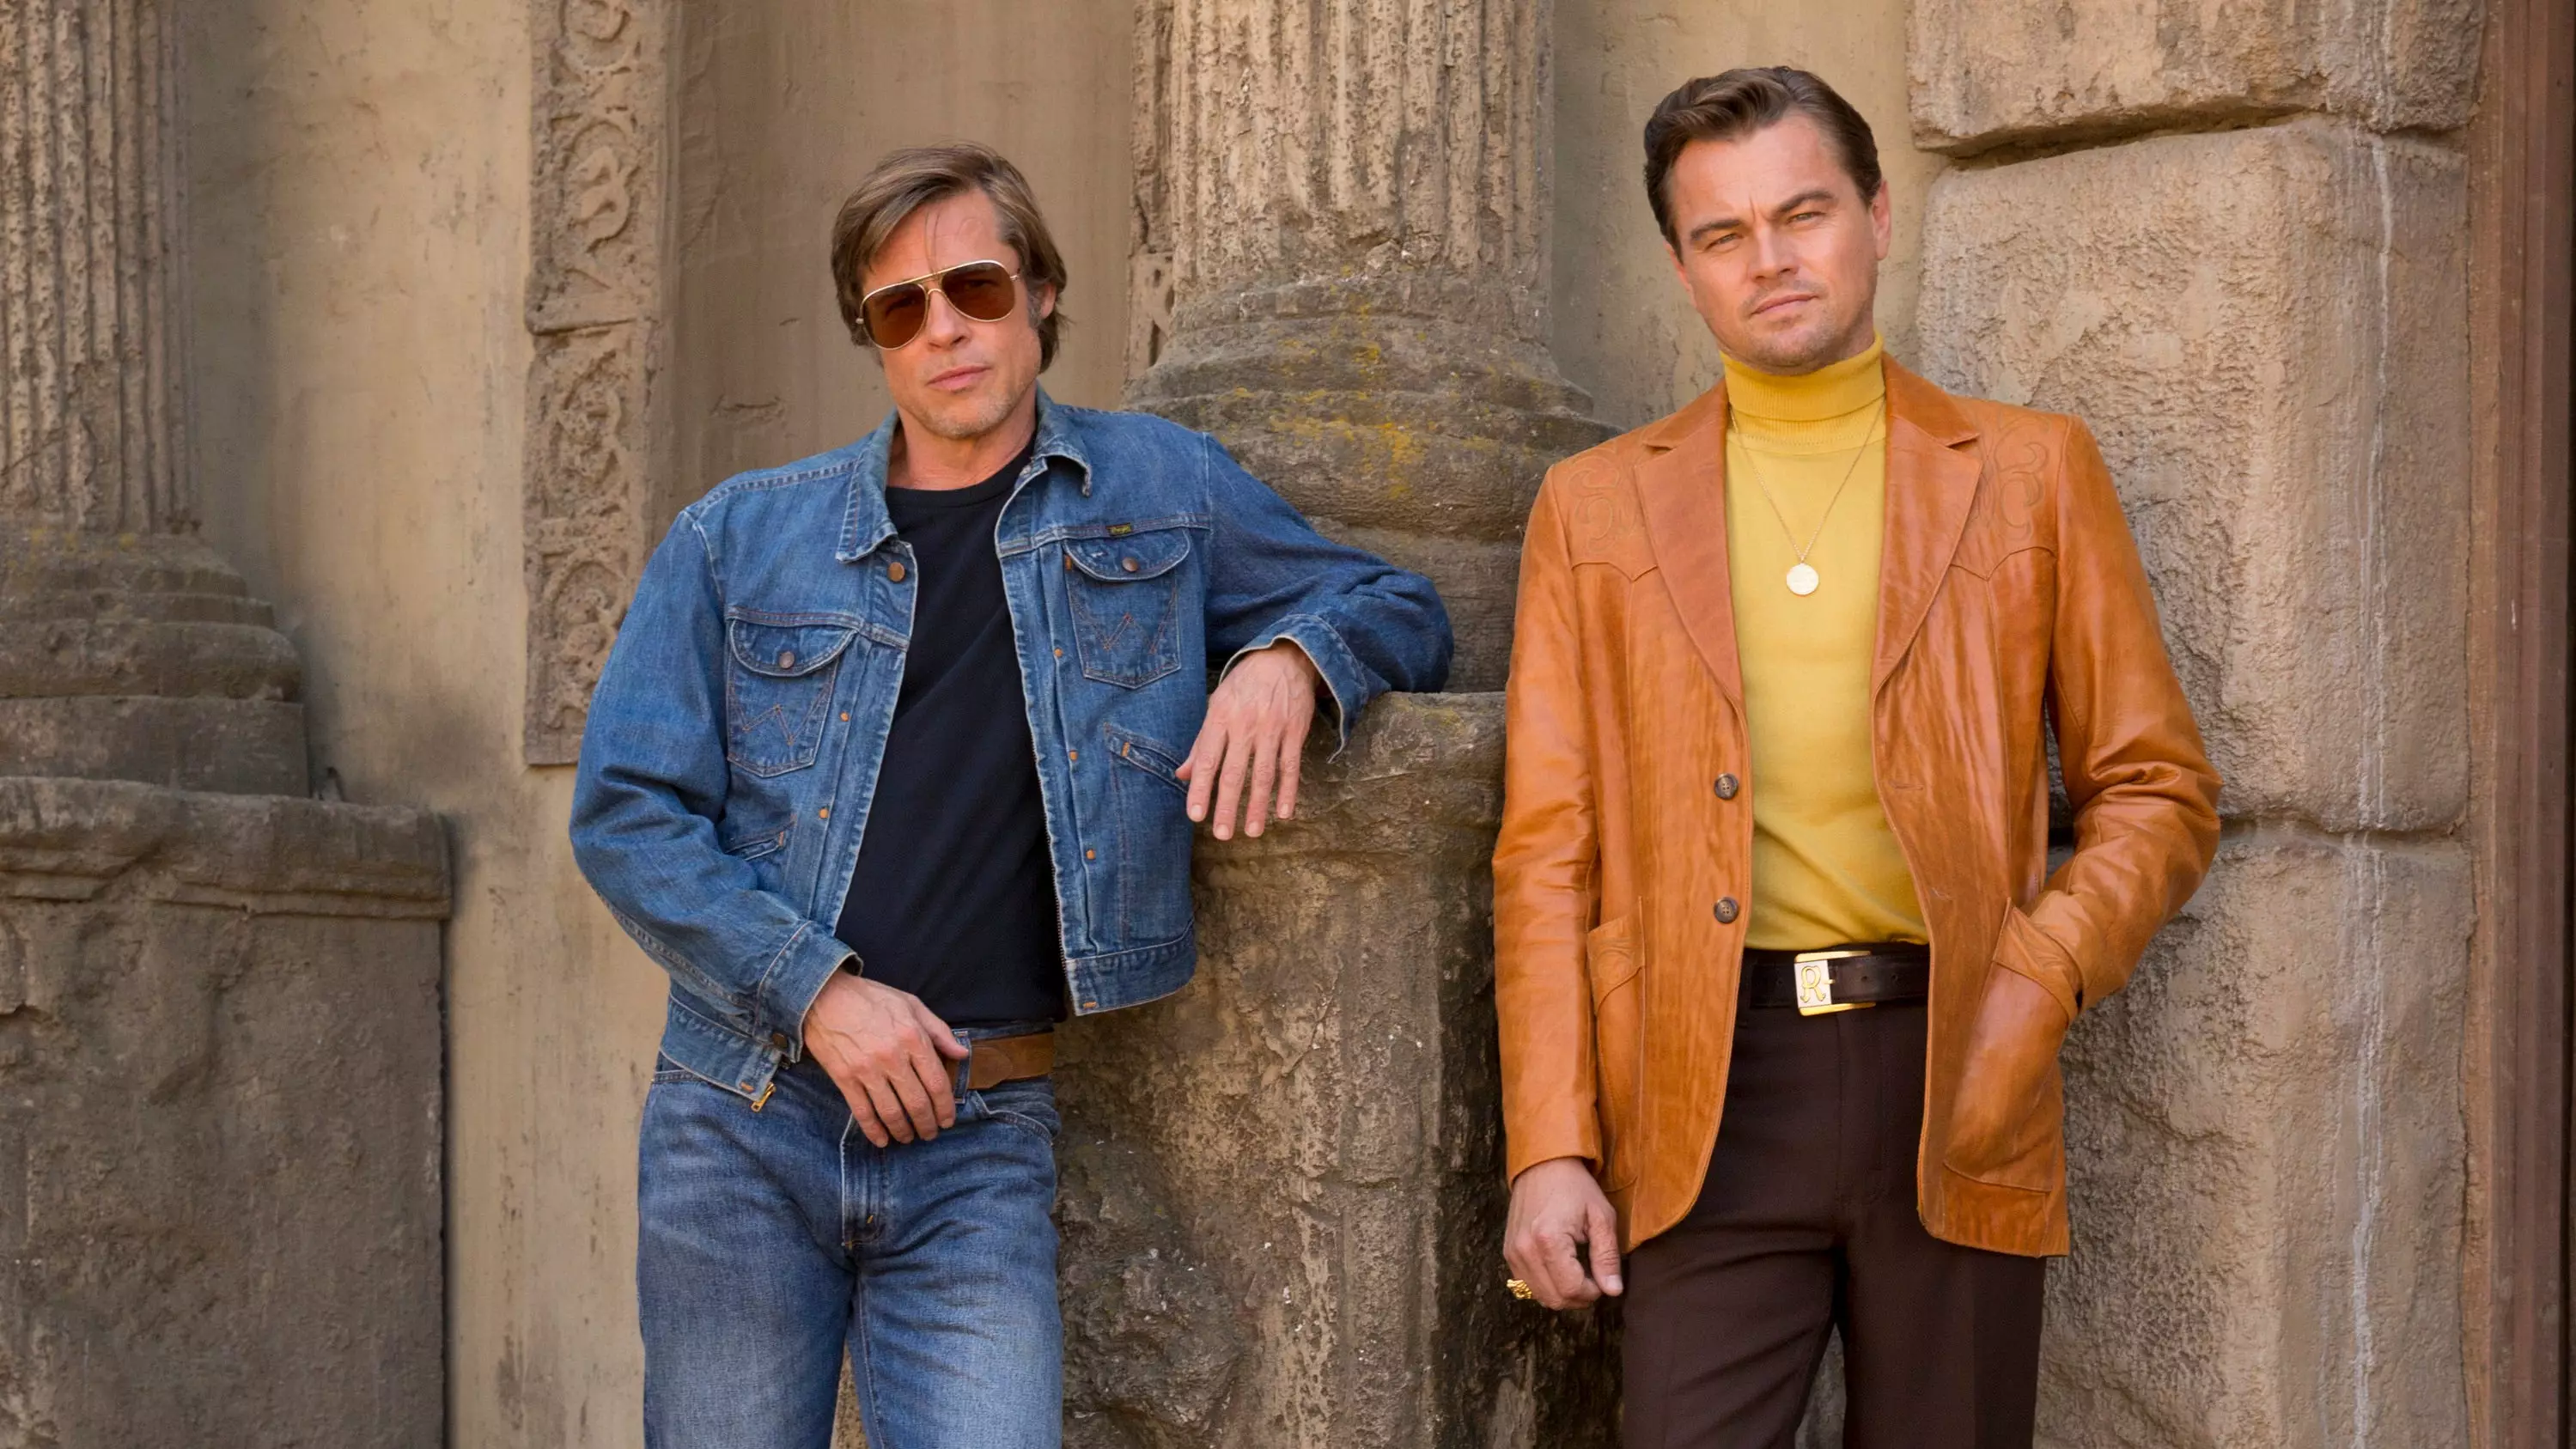 Pitt and Leonardo DiCaprio in Once Upon a Time in Hollywood.